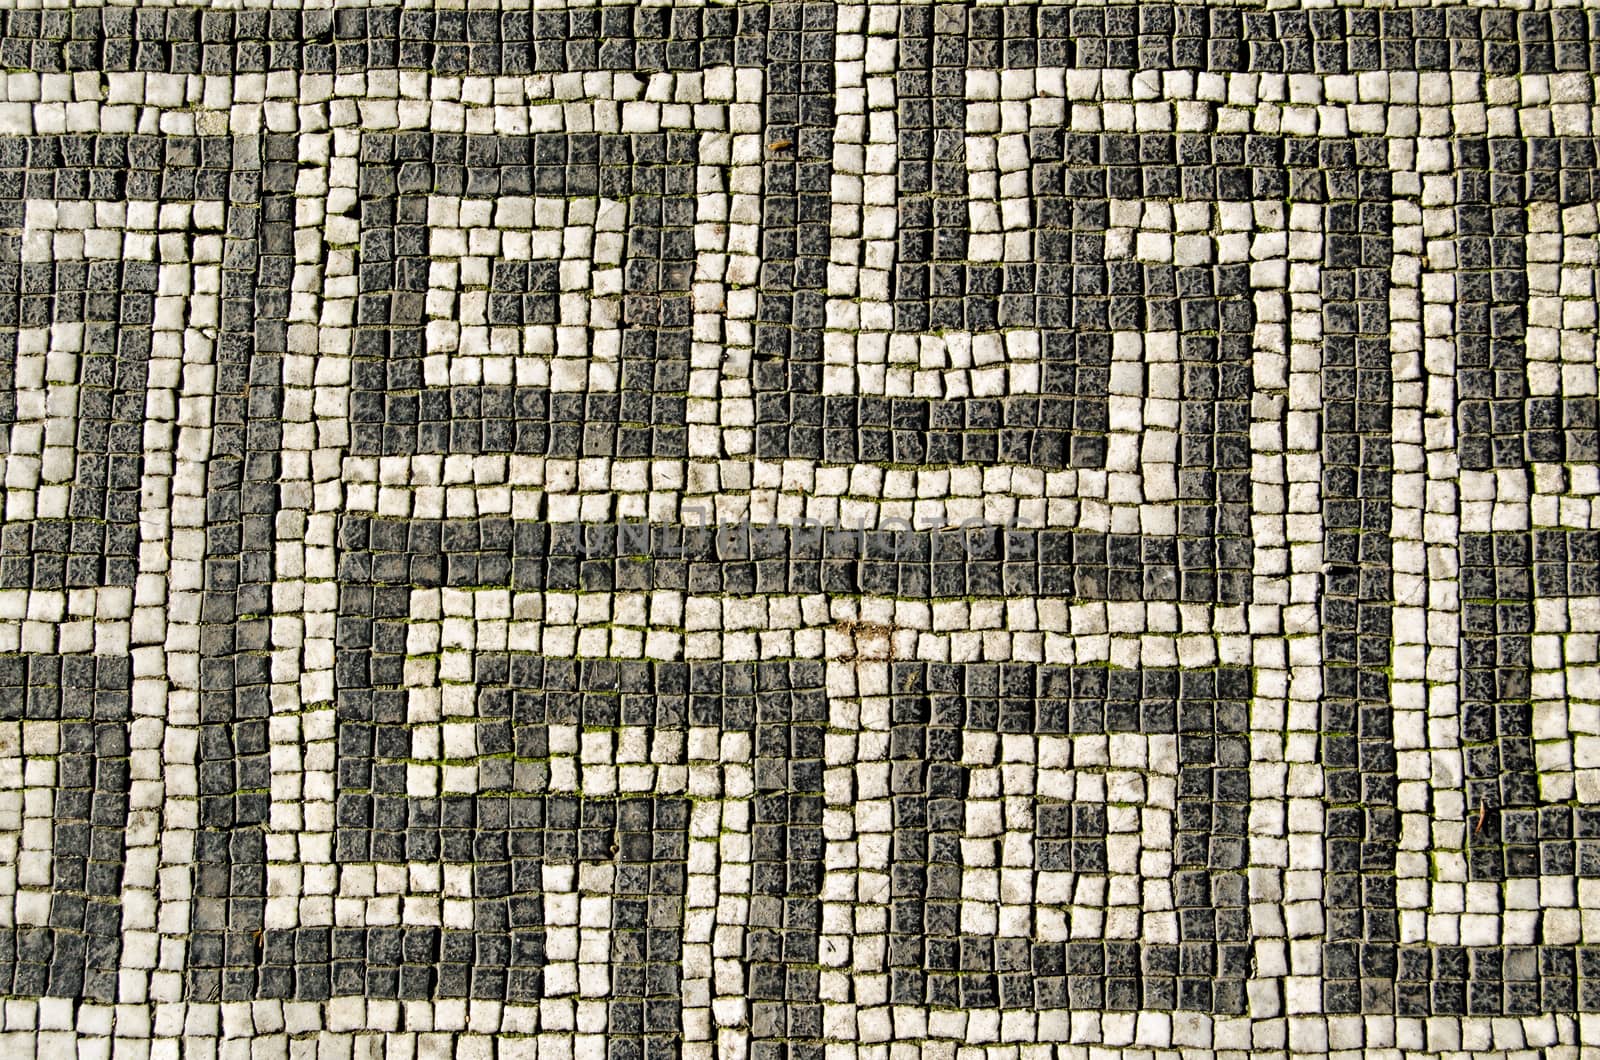 Mosaic tiles in the form of a greek key design on a pavement in London.  